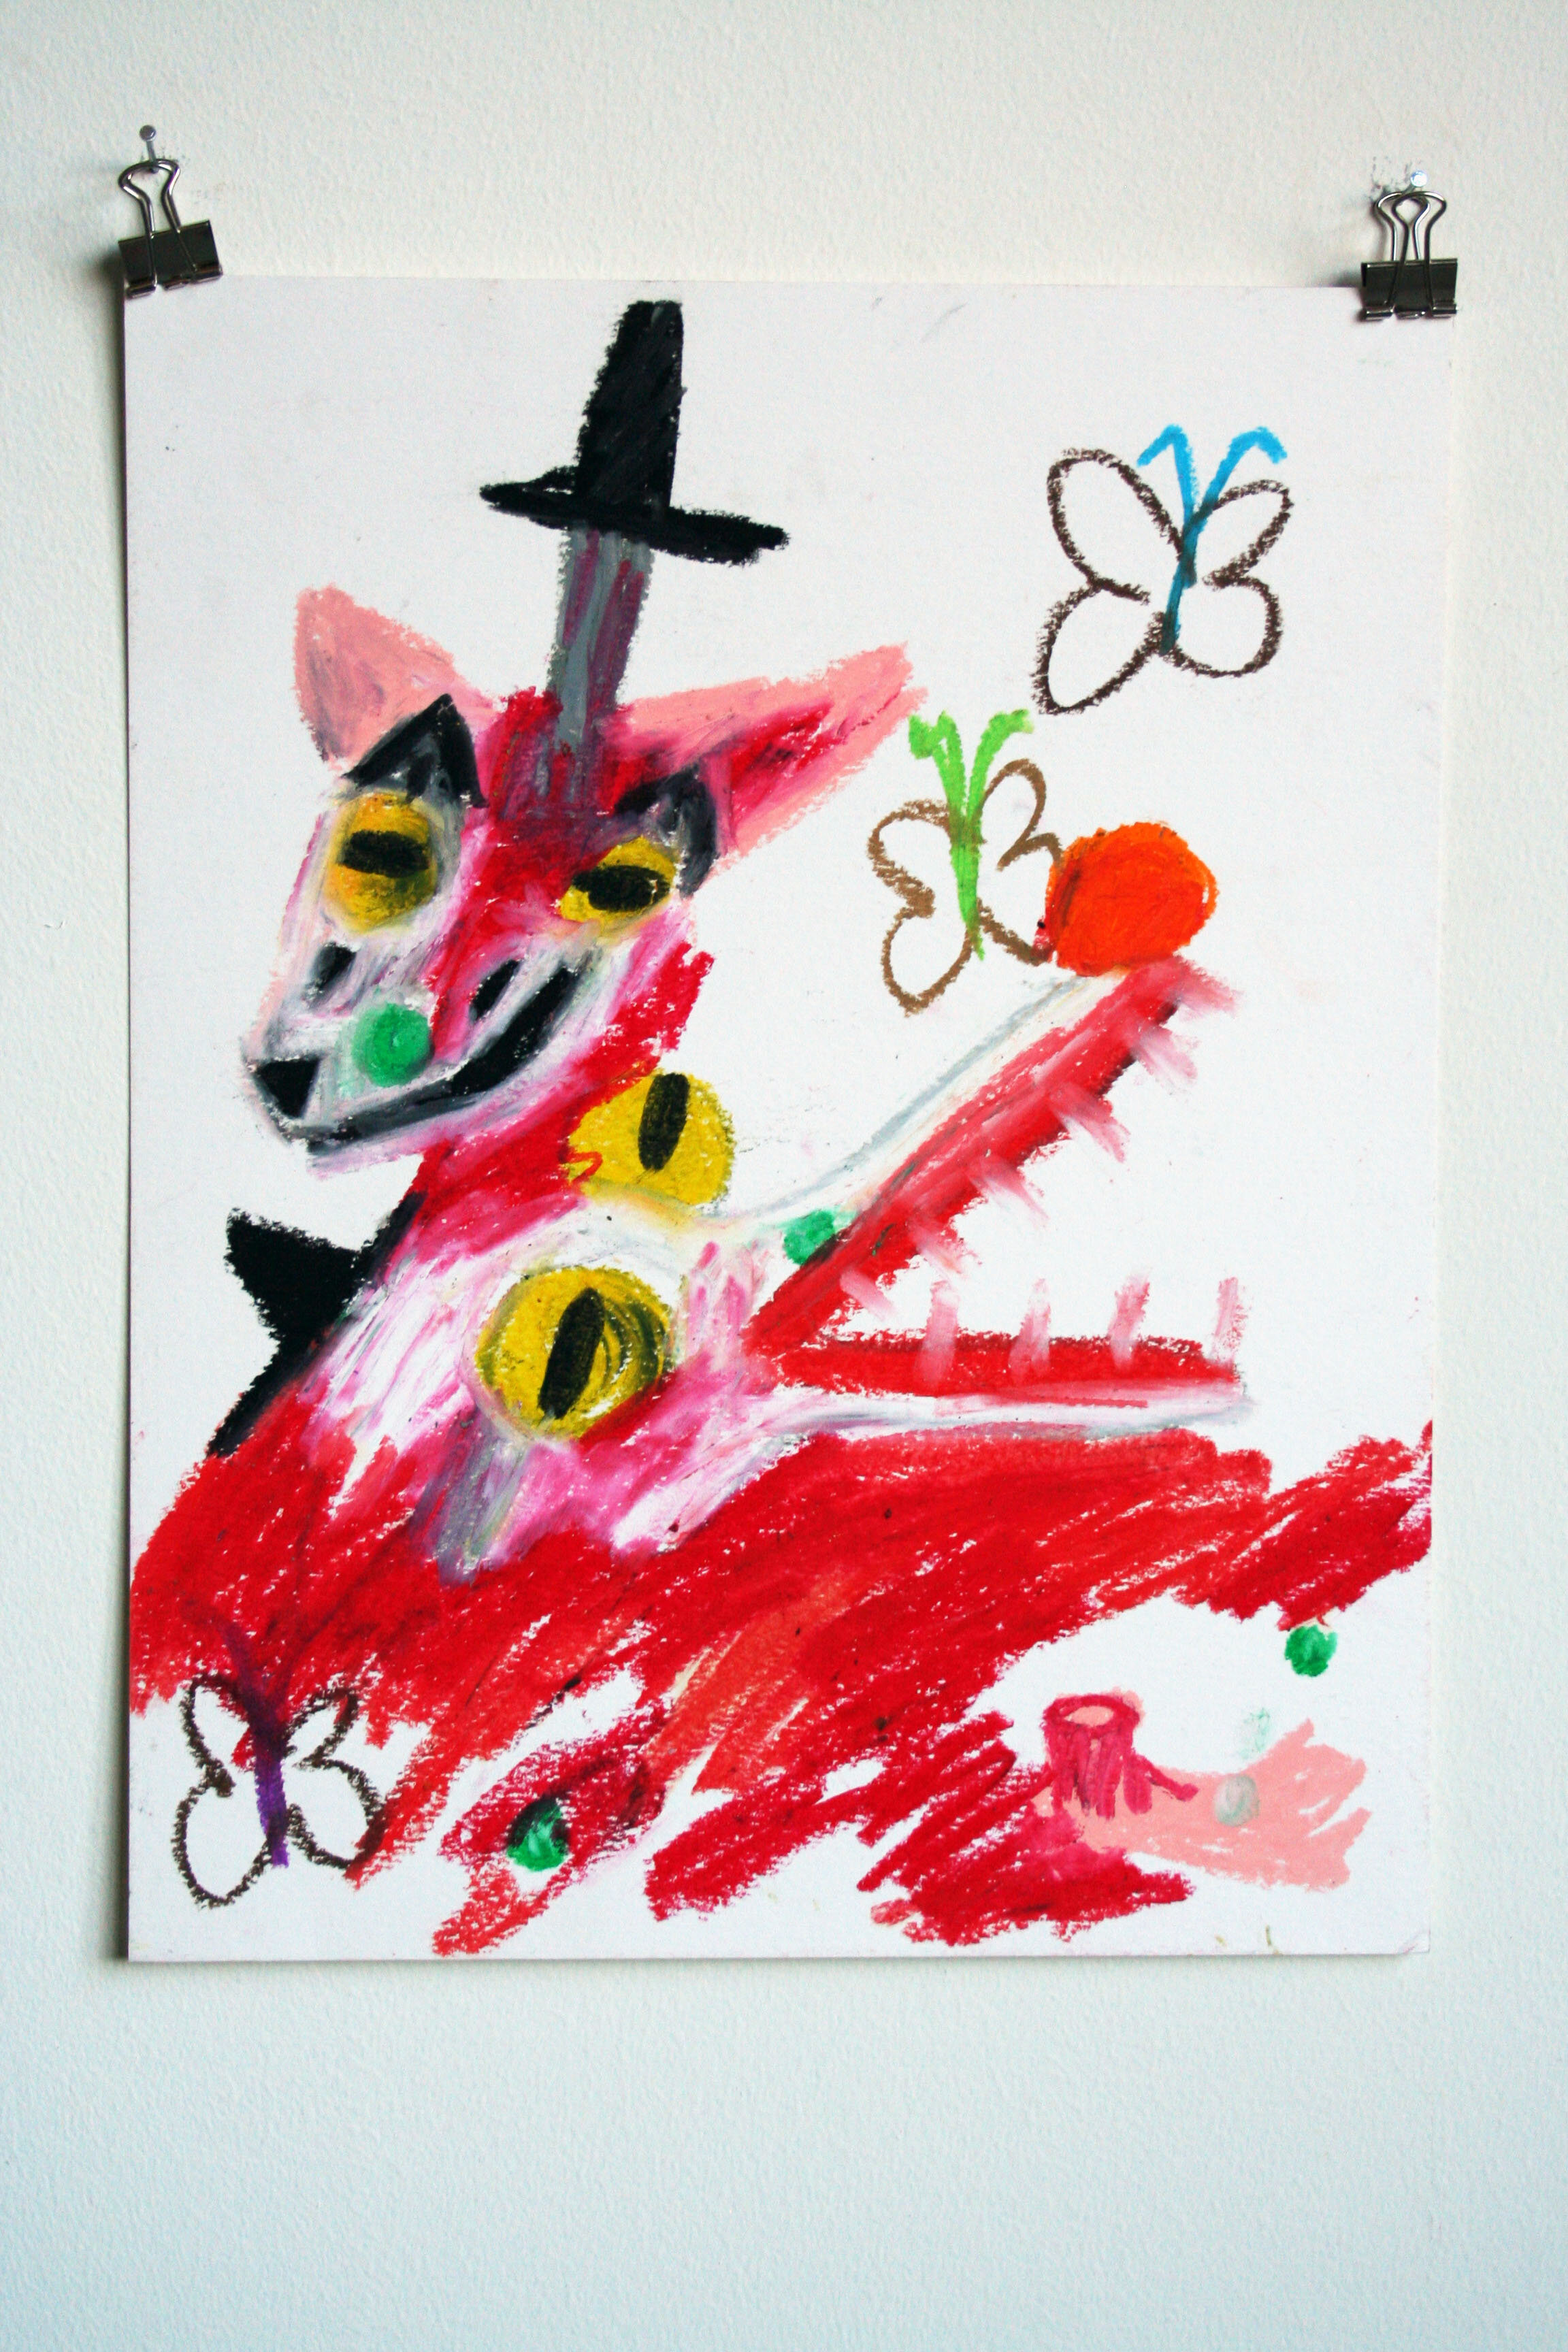   Head Totem,  2014  24 x 18 inches (60.96 x 45.72 cm.)  Oil pastel on paper 